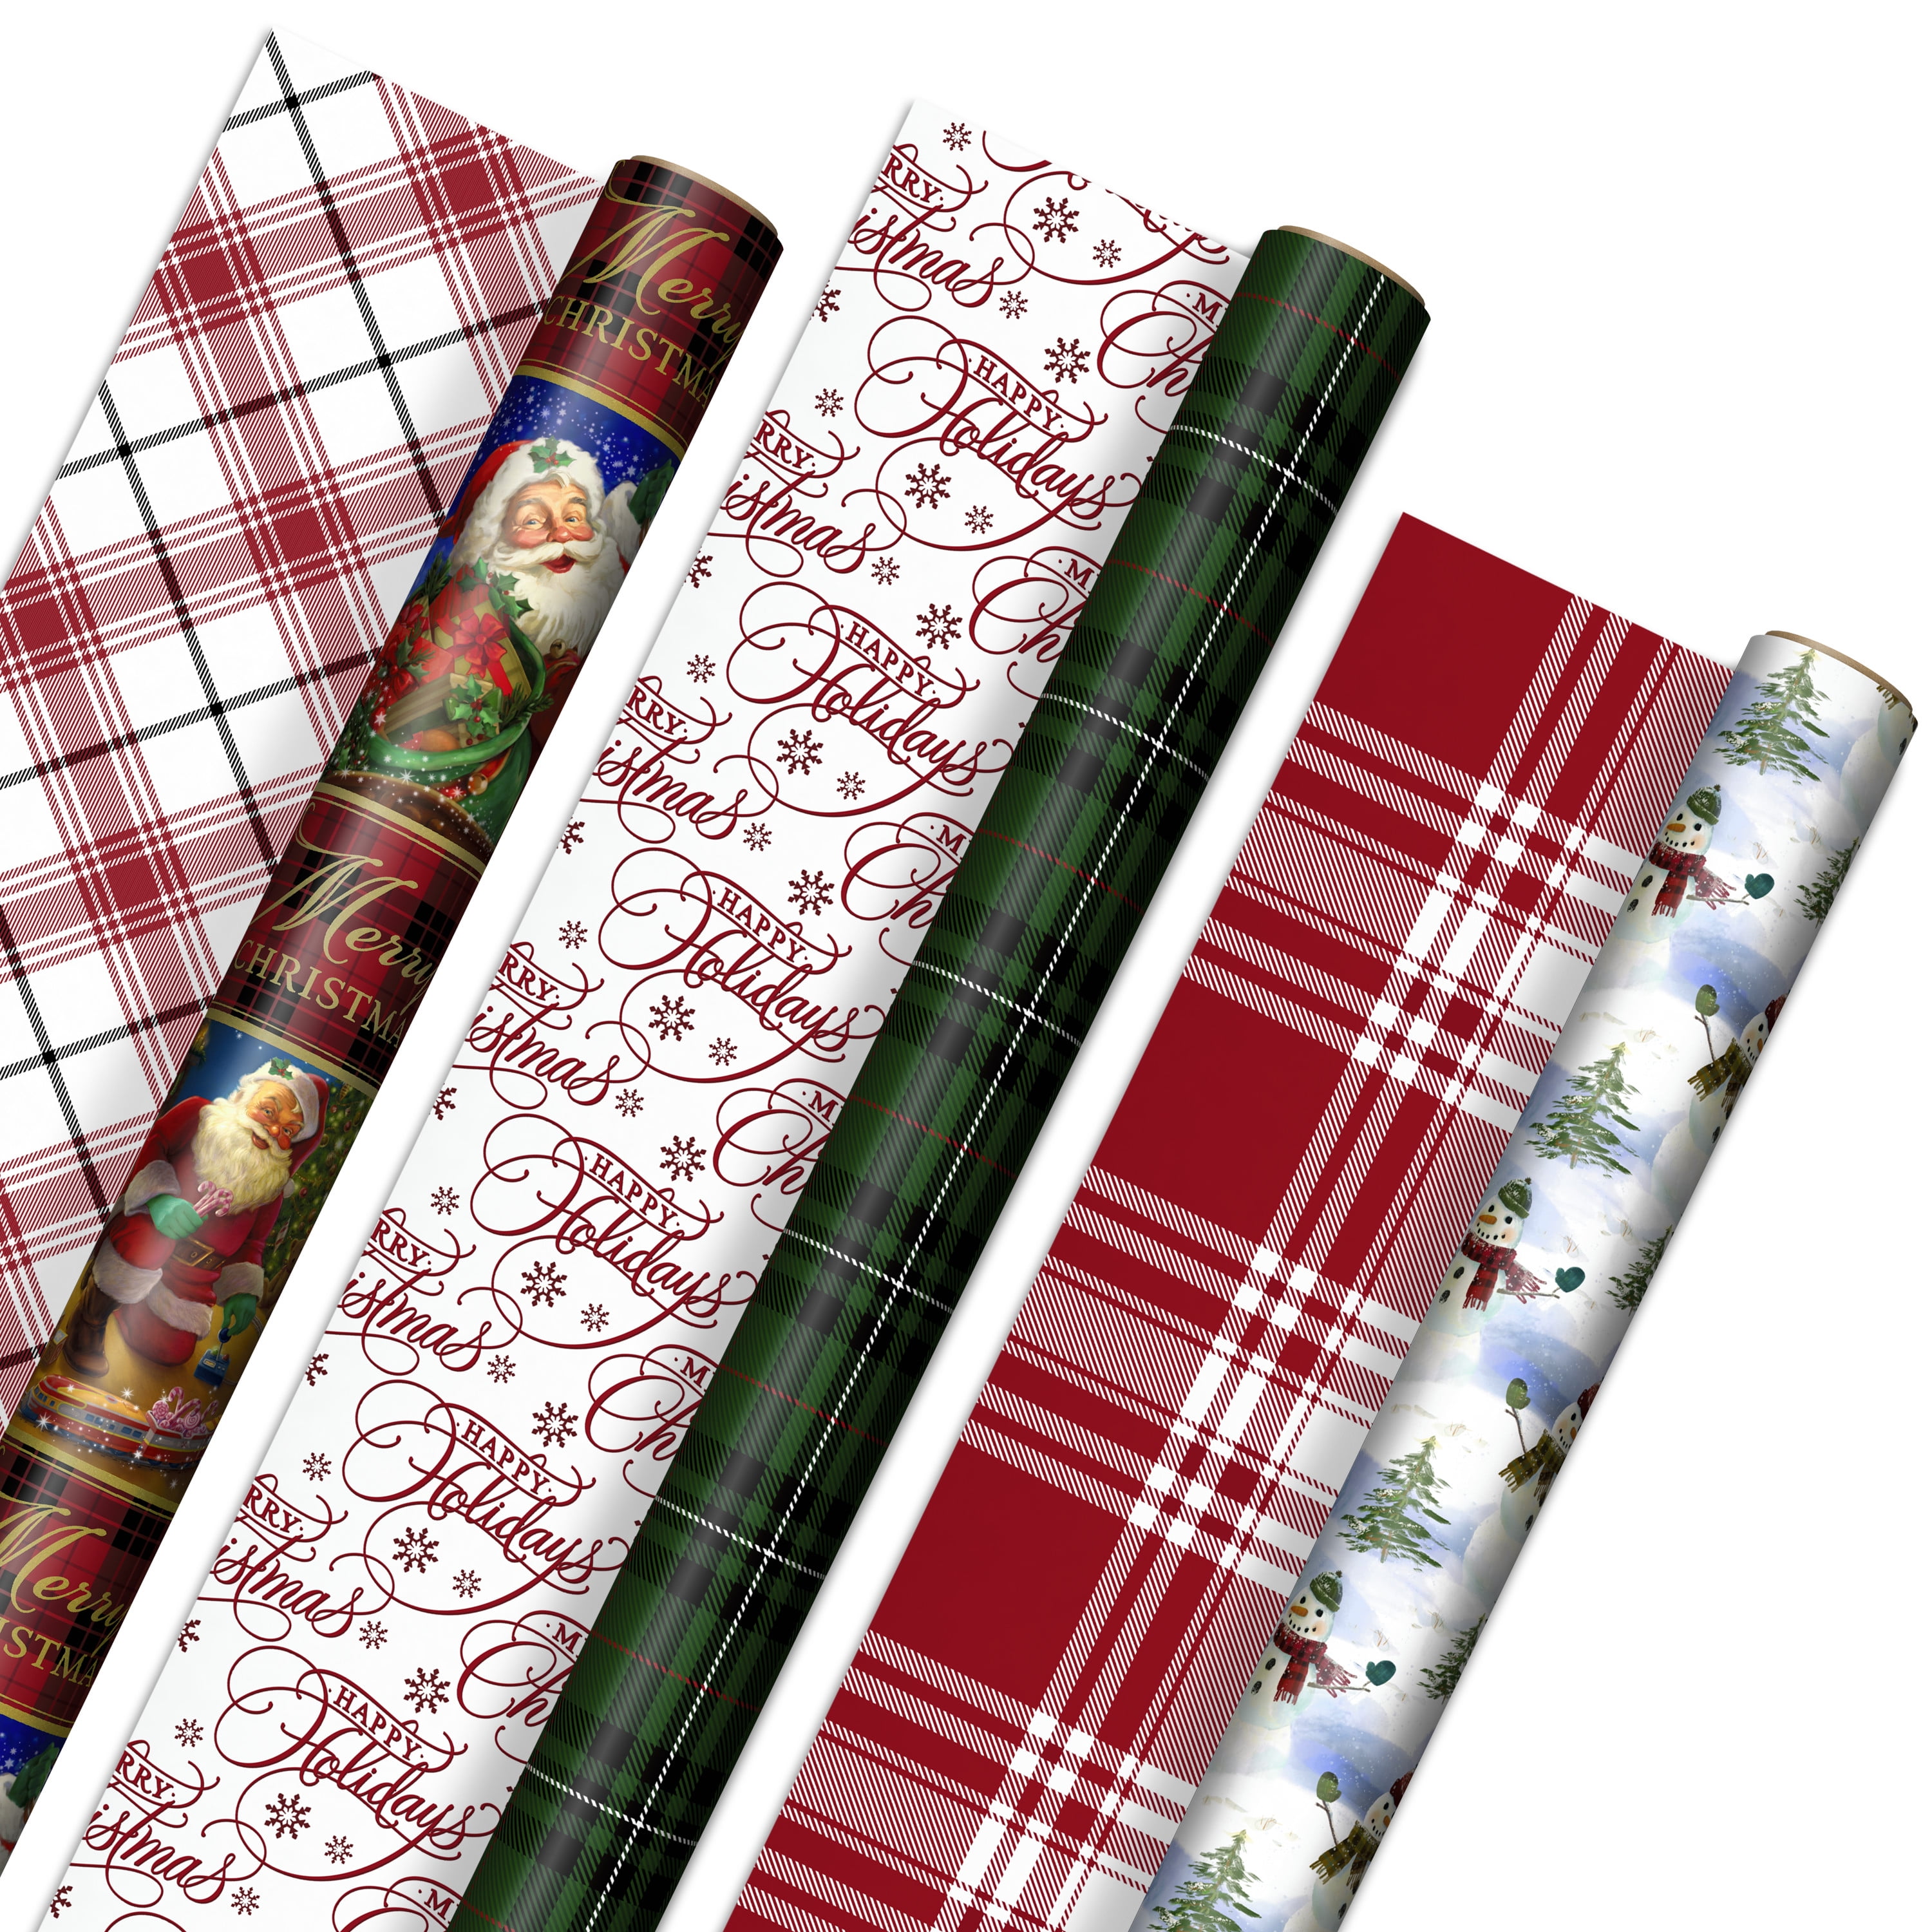 Wrapping Paper Roll Wrap-Holiday Christmas Gift Wrapping Paper Many Designs 16ft